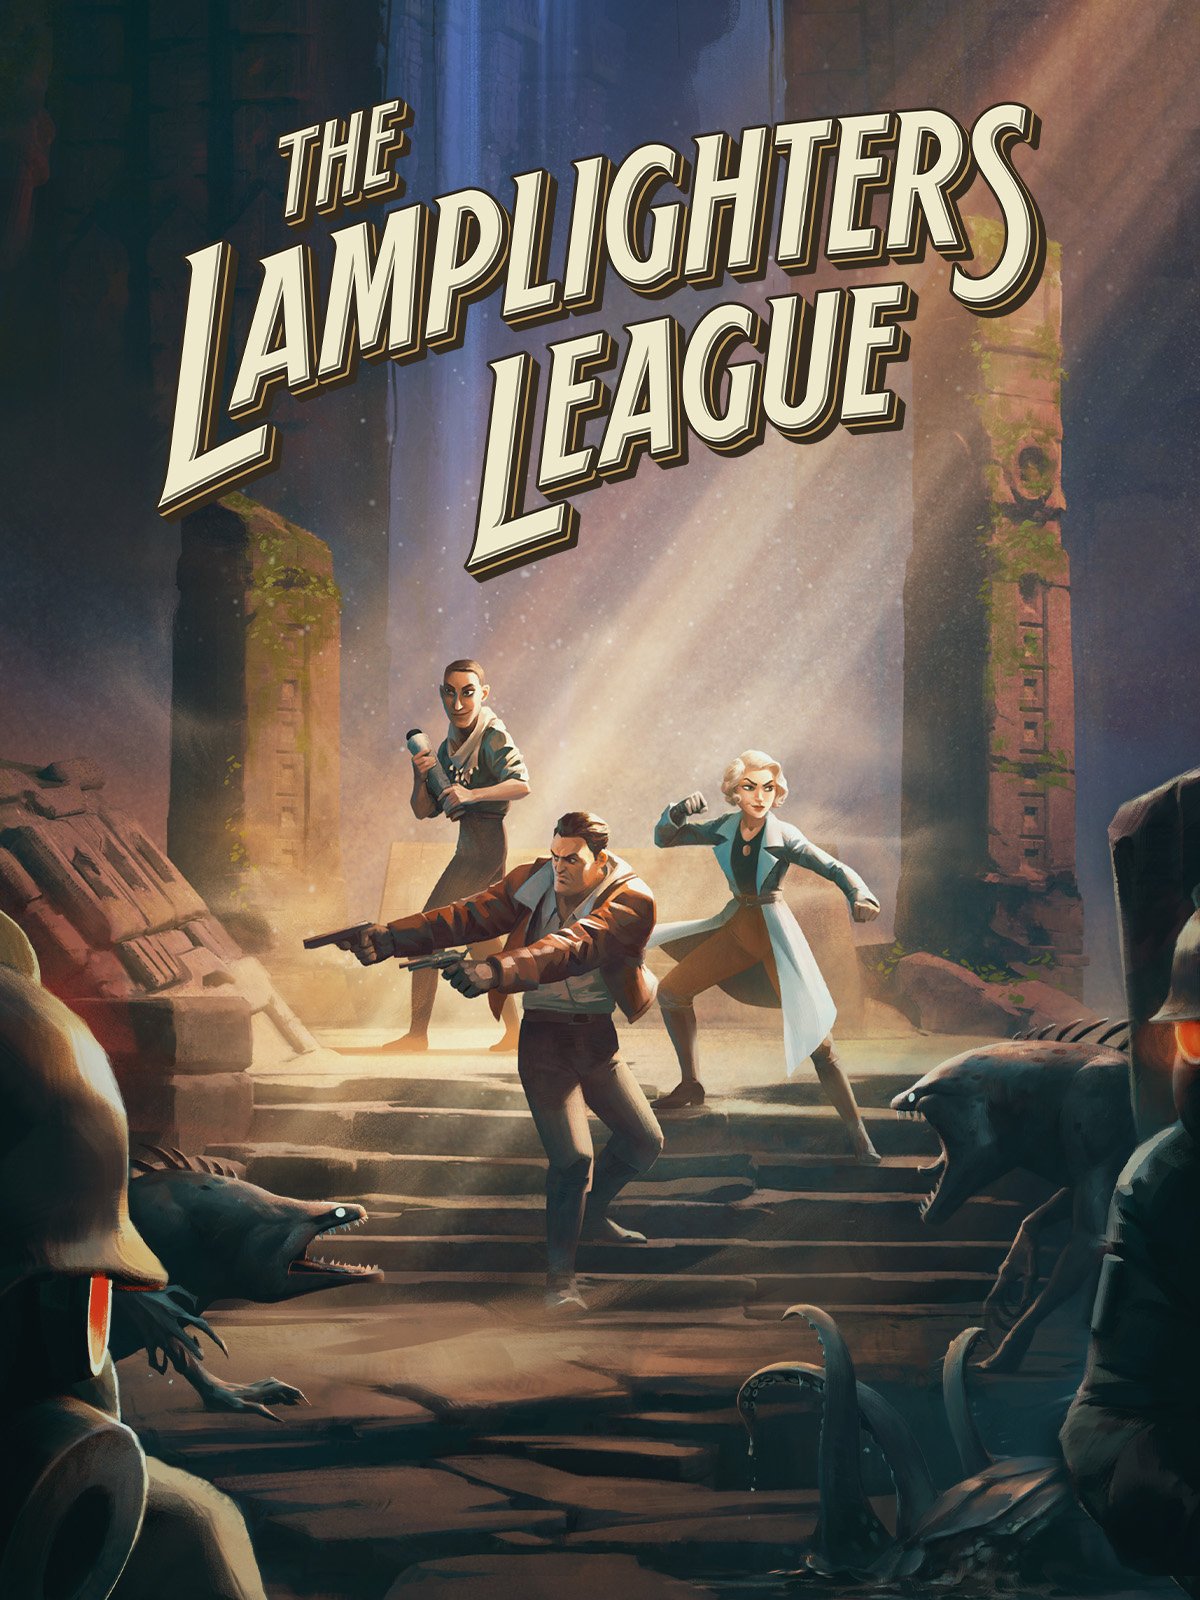 download The Lamplighters League free